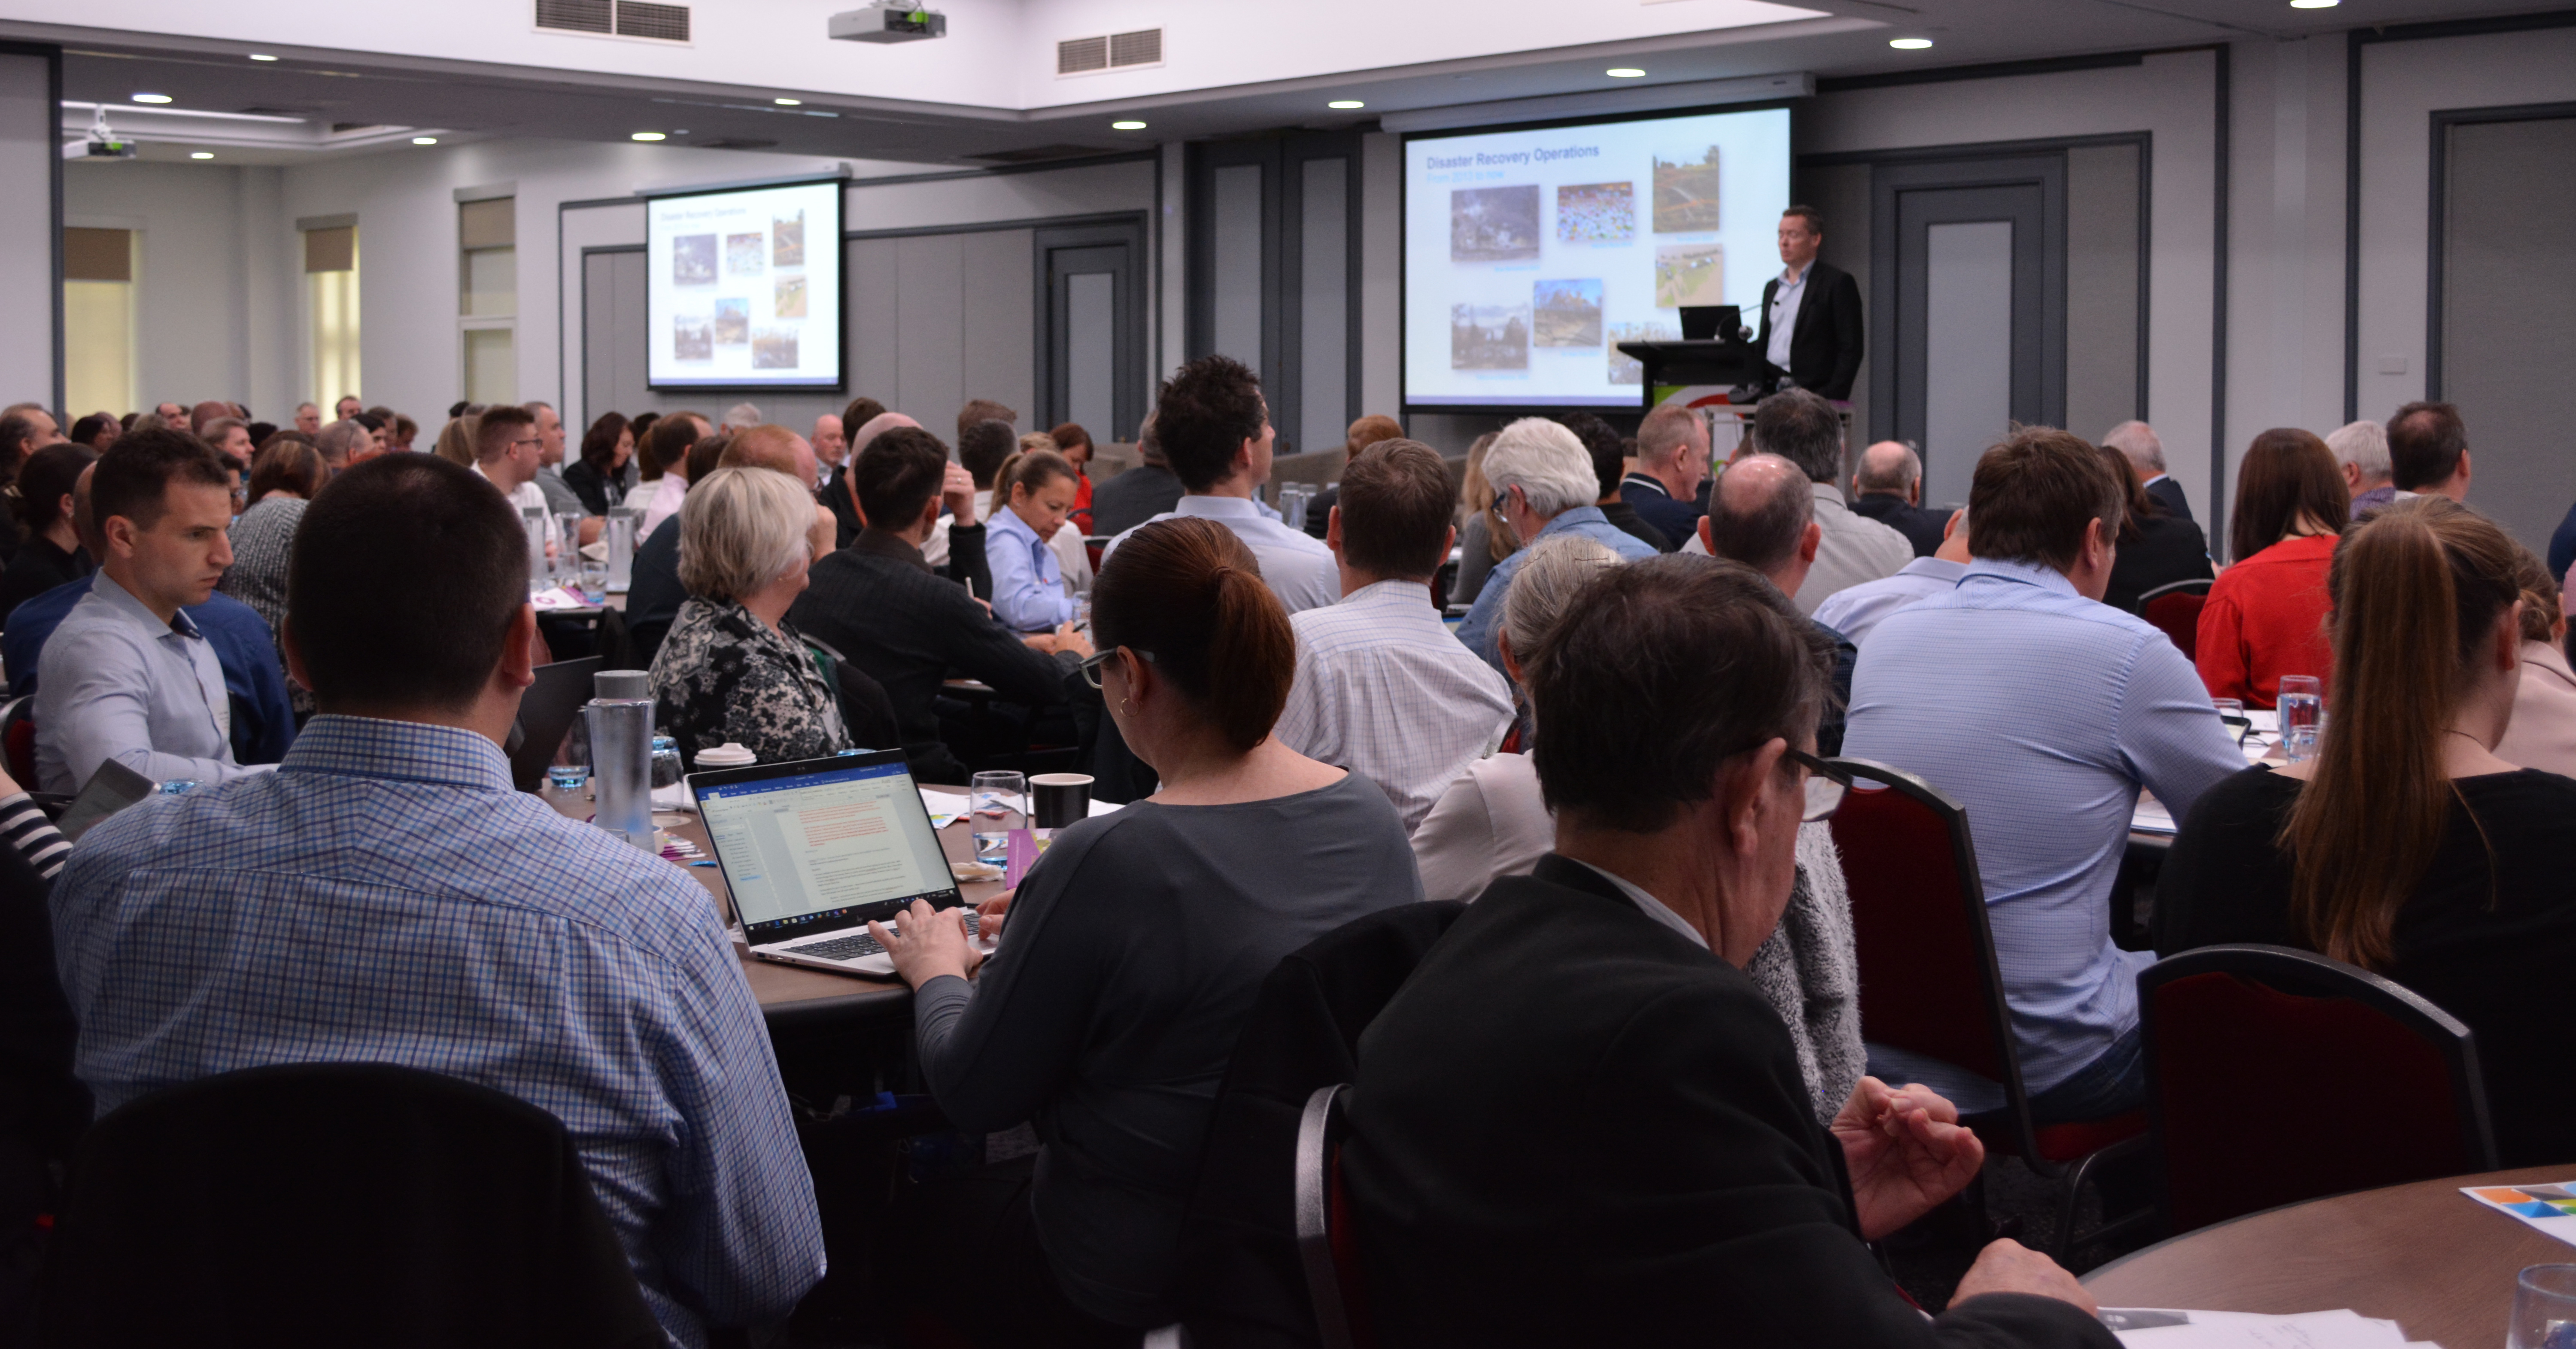 The 2019 Lessons Management Forum drew a large crowd in Sydney.